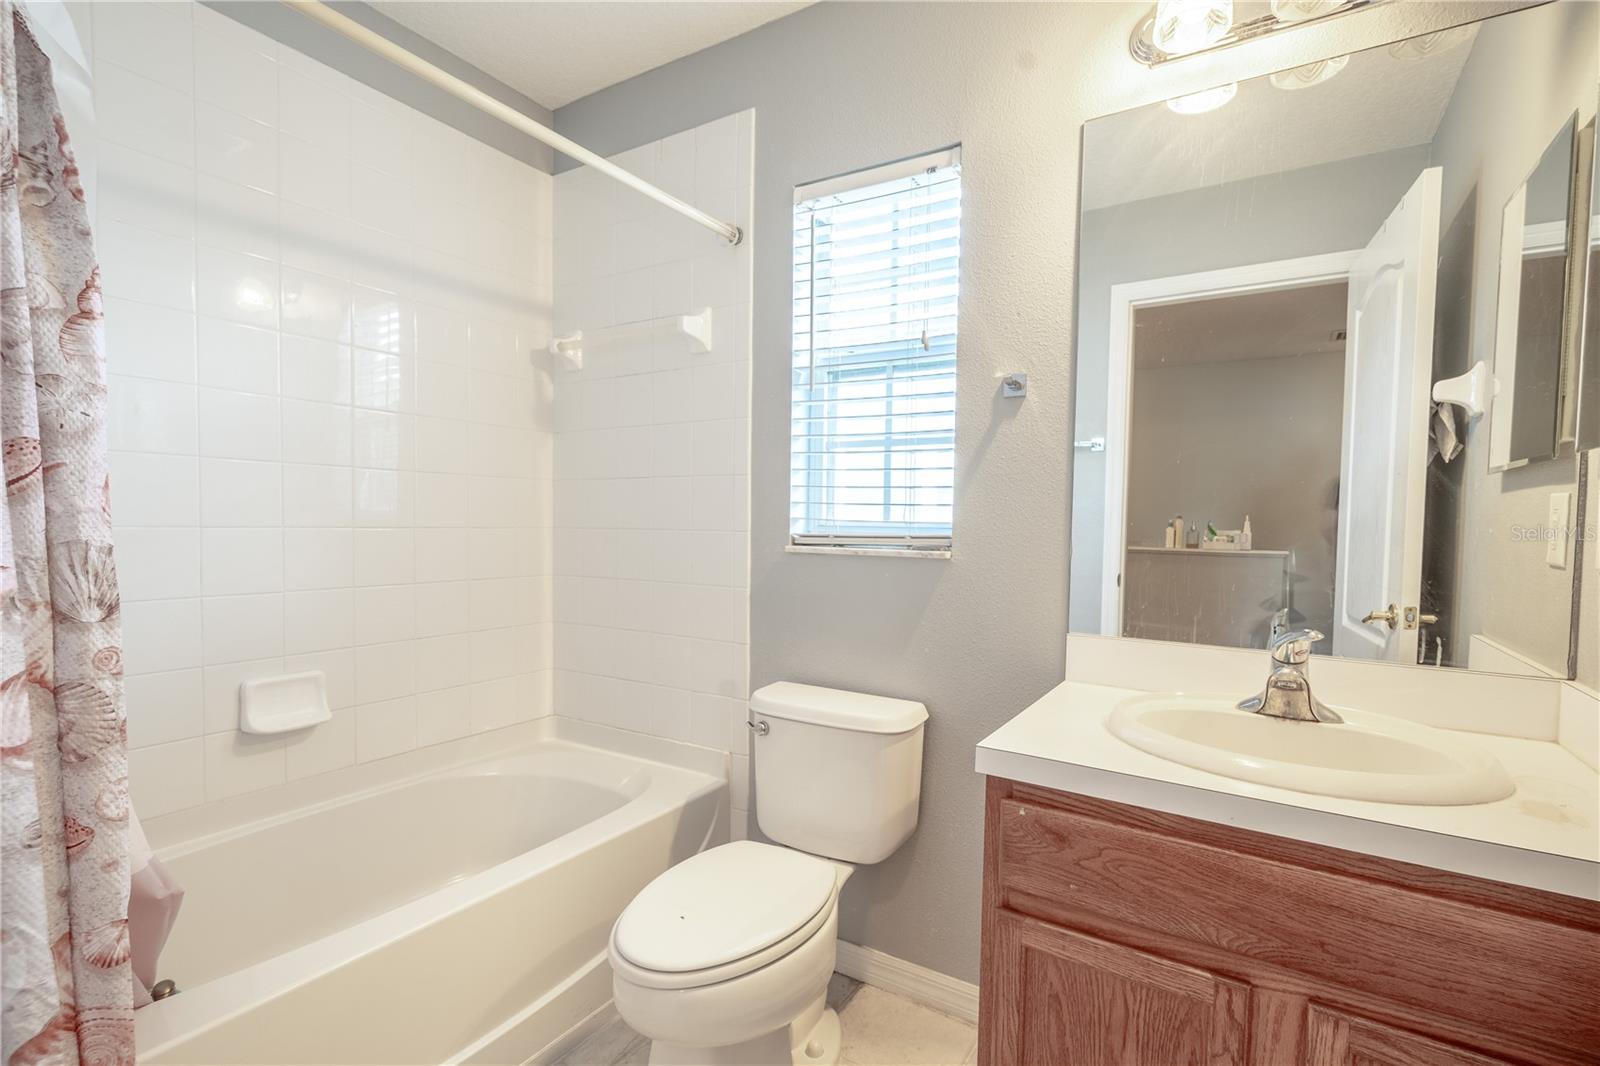 Bathroom 2 features a tub with shower, ceramic tile flooring, and a mirrored vanity with storage.